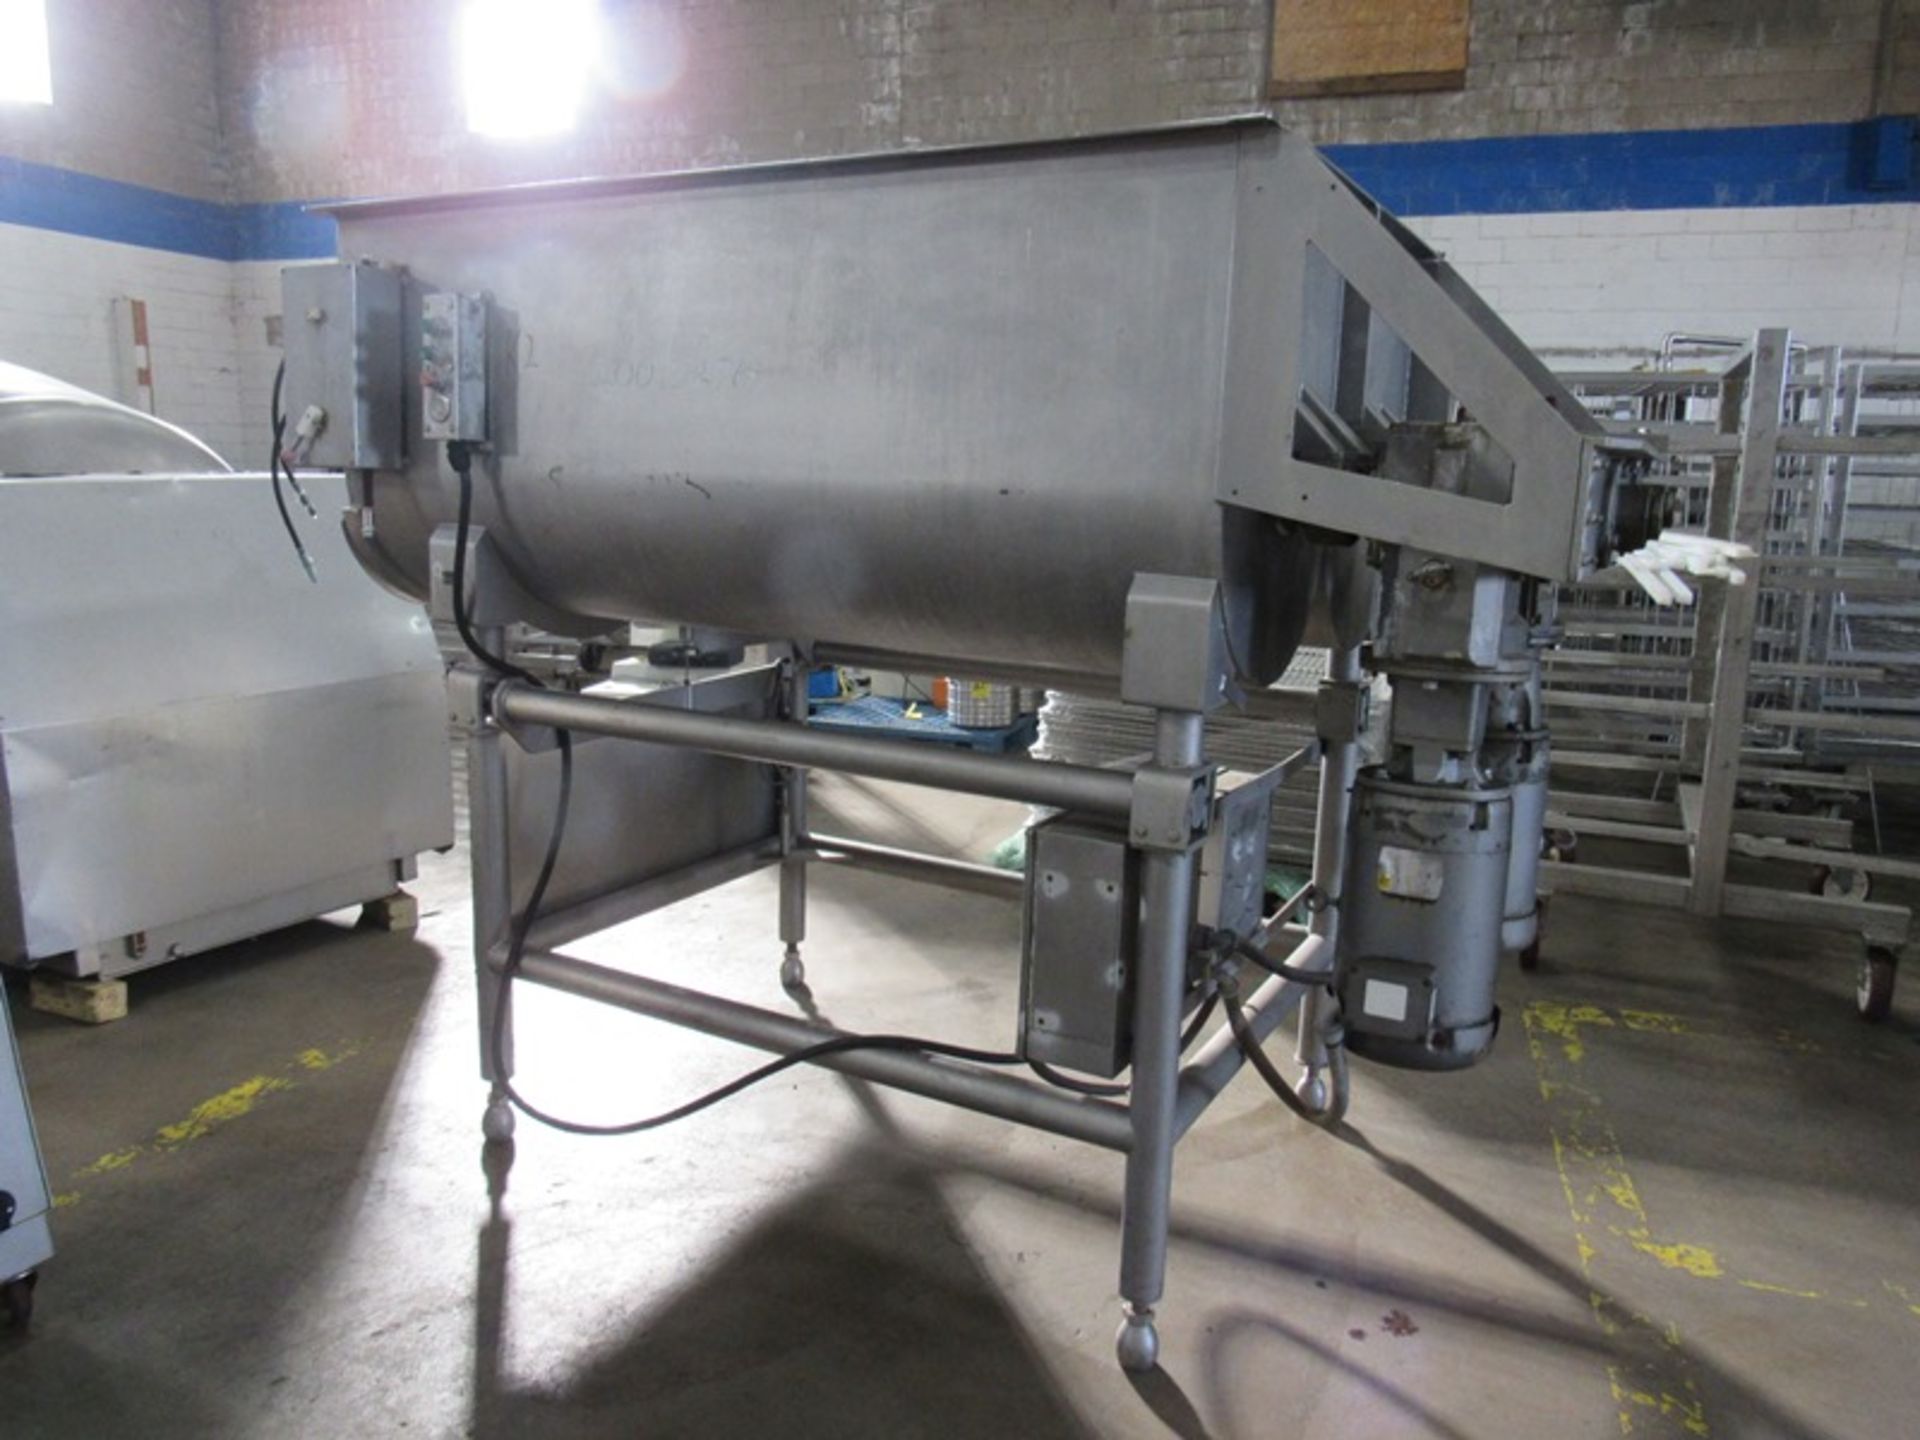 Stainless Steel Dual Shaft Ribbon Blender, 4' W X 6' L X 30" D bowl, pneumatic dual front end - Image 3 of 8